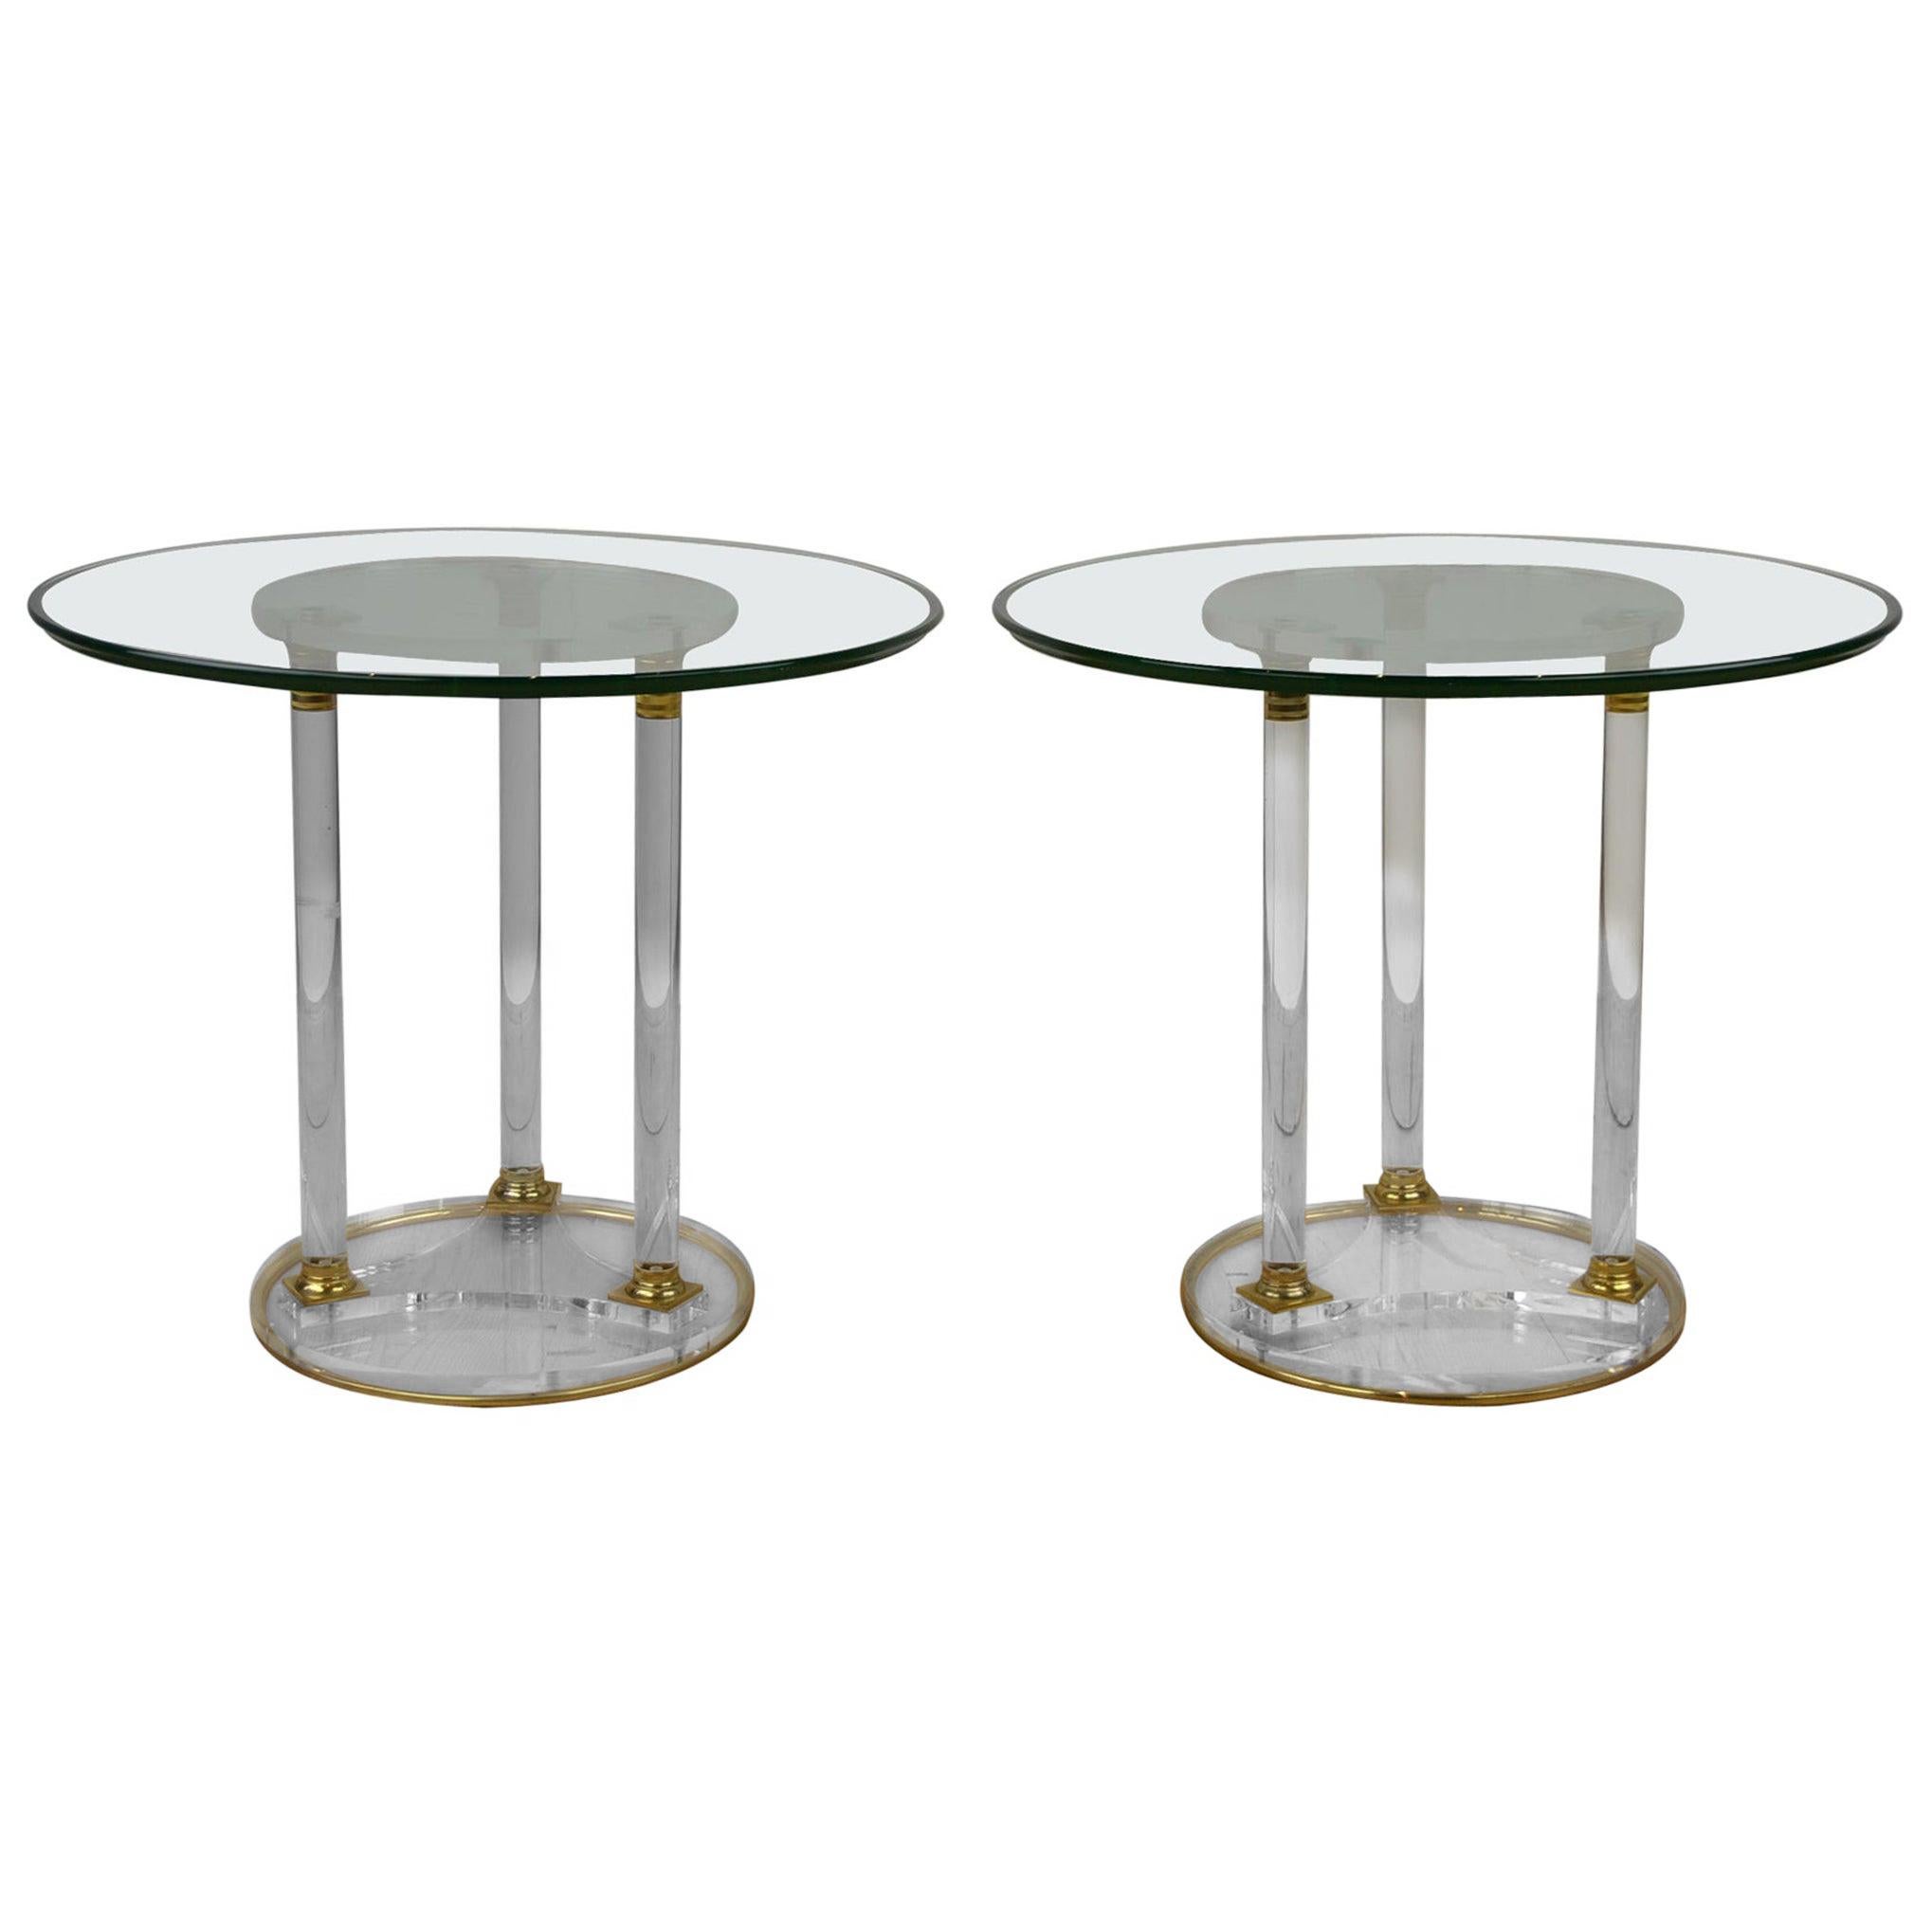 Pair of Round Lucite with Brass Side Tables, French Modern Design Tables , 1970s